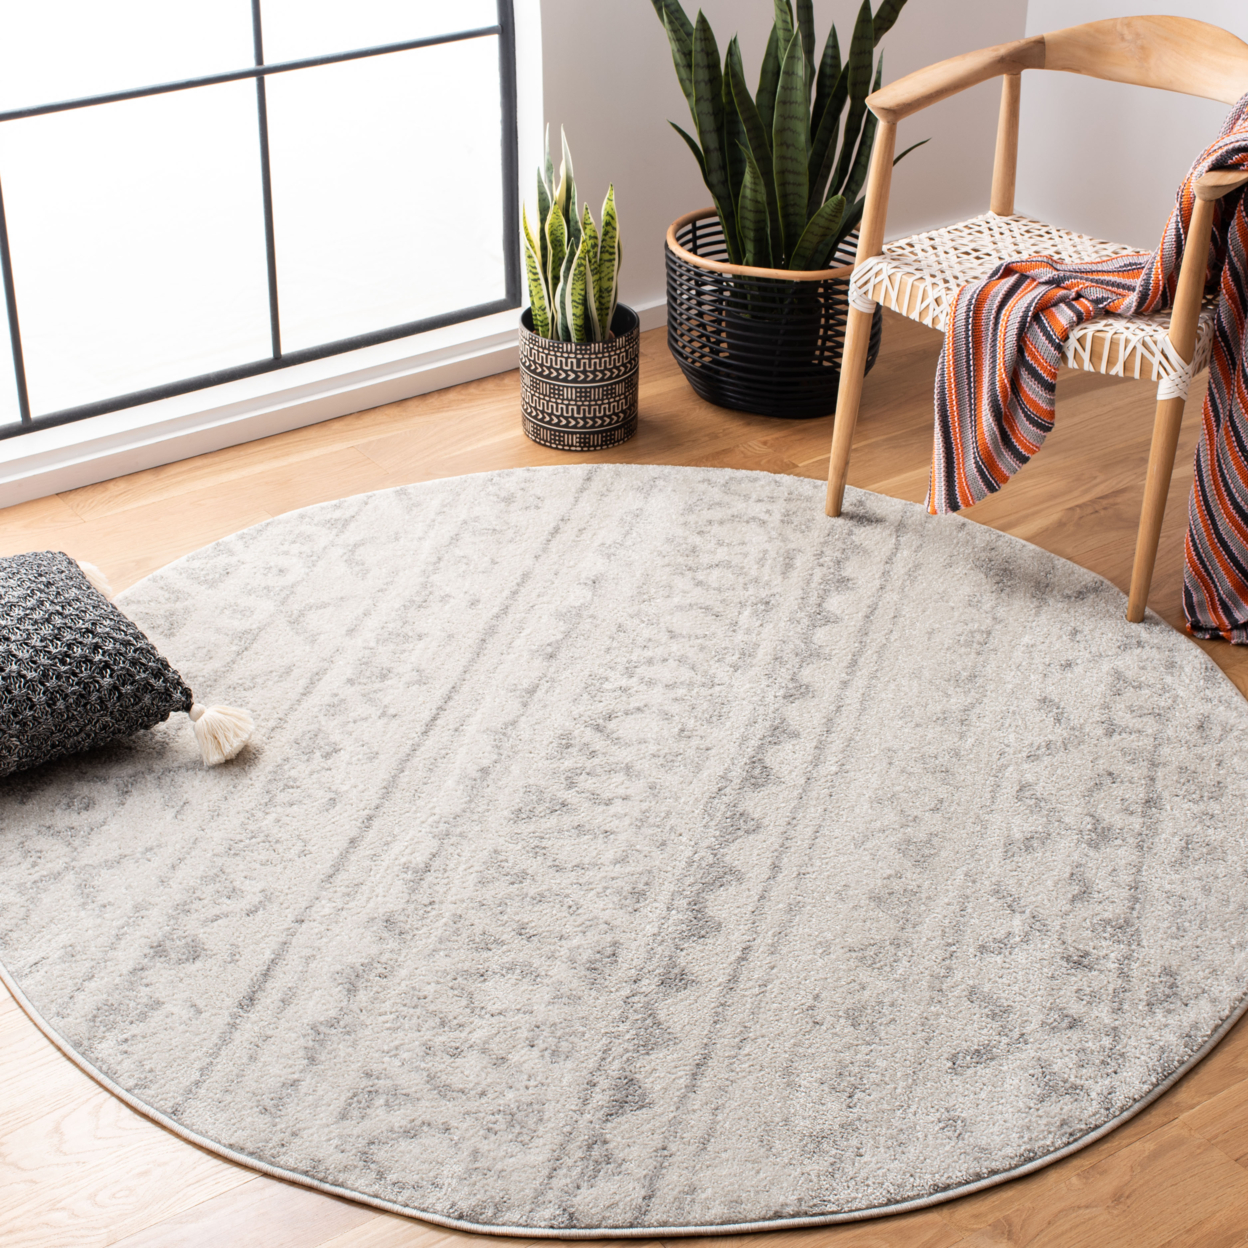 SAFAVIEH Adirondack Collection ADR119A Ivory / Silver Rug - 2' 6 X 6'